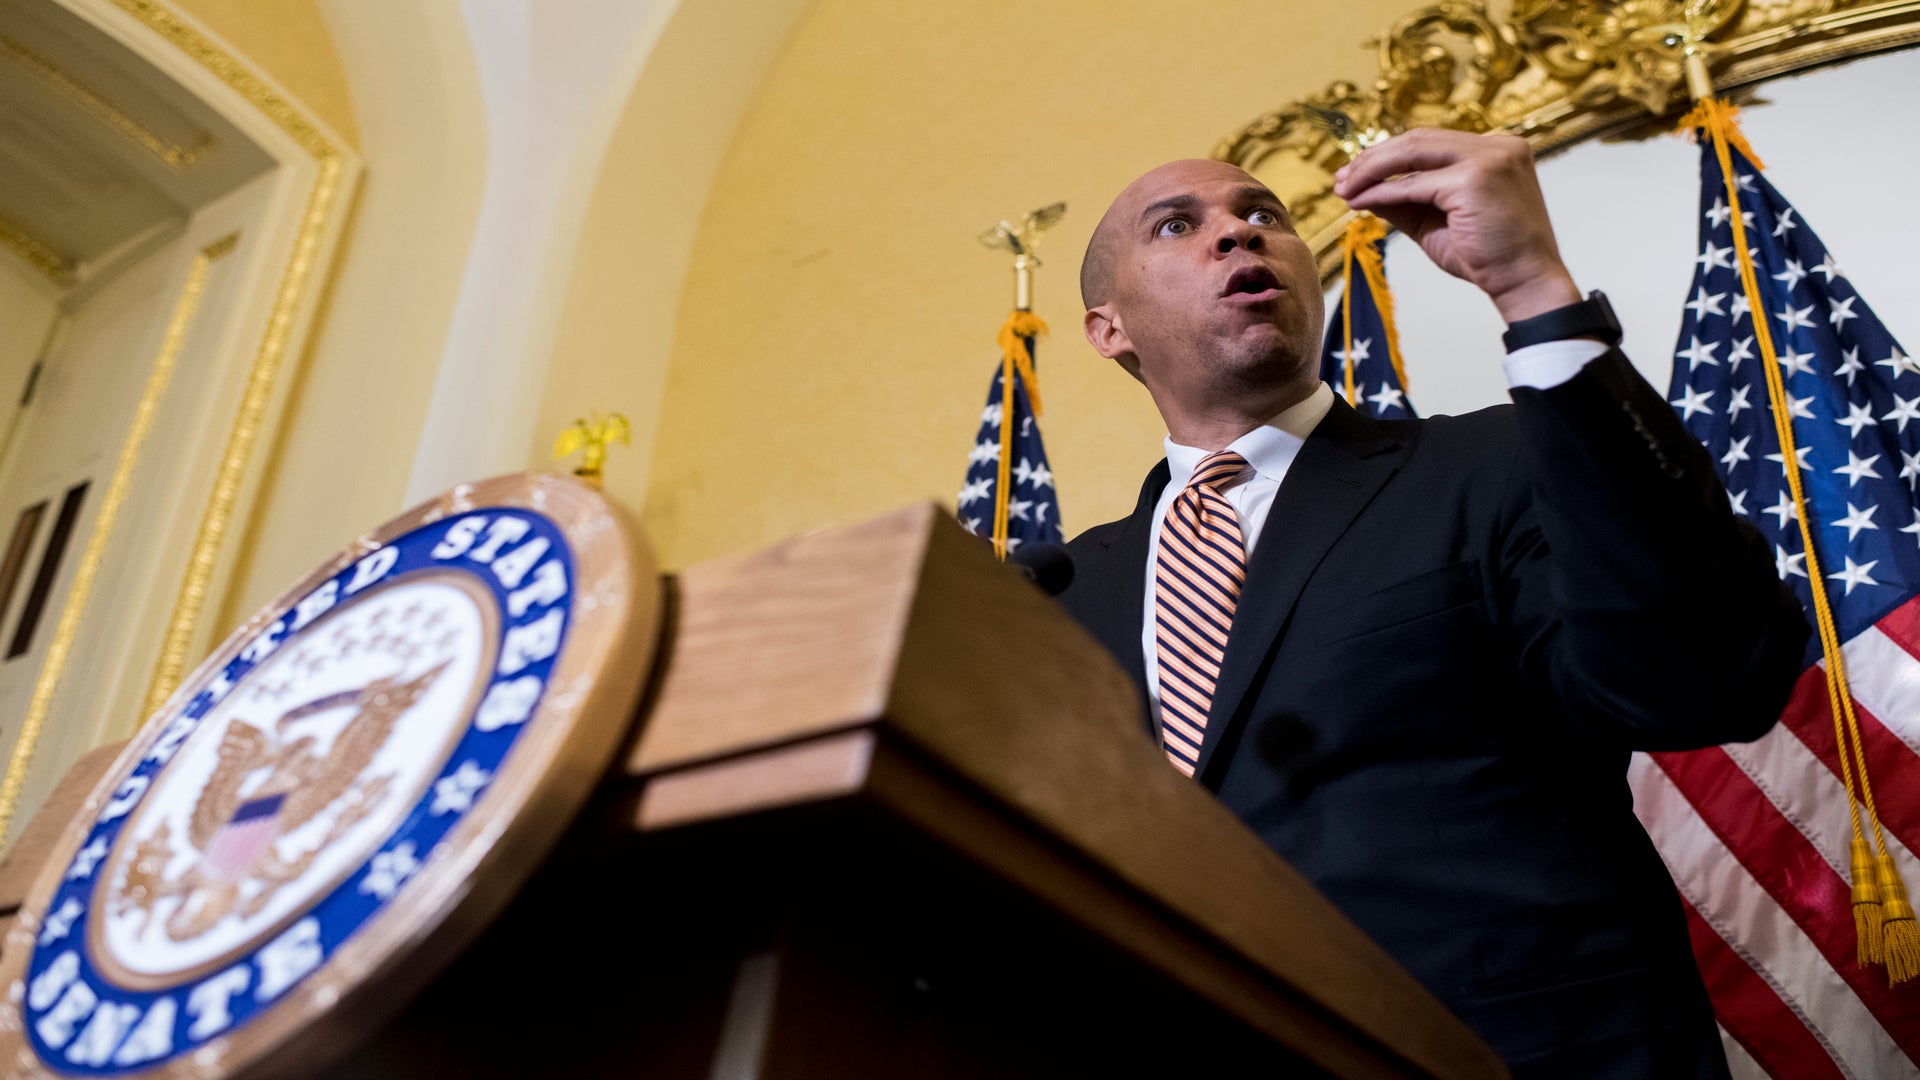 Cory Booker Announces 2020 Presidential Bid On The First Day Of